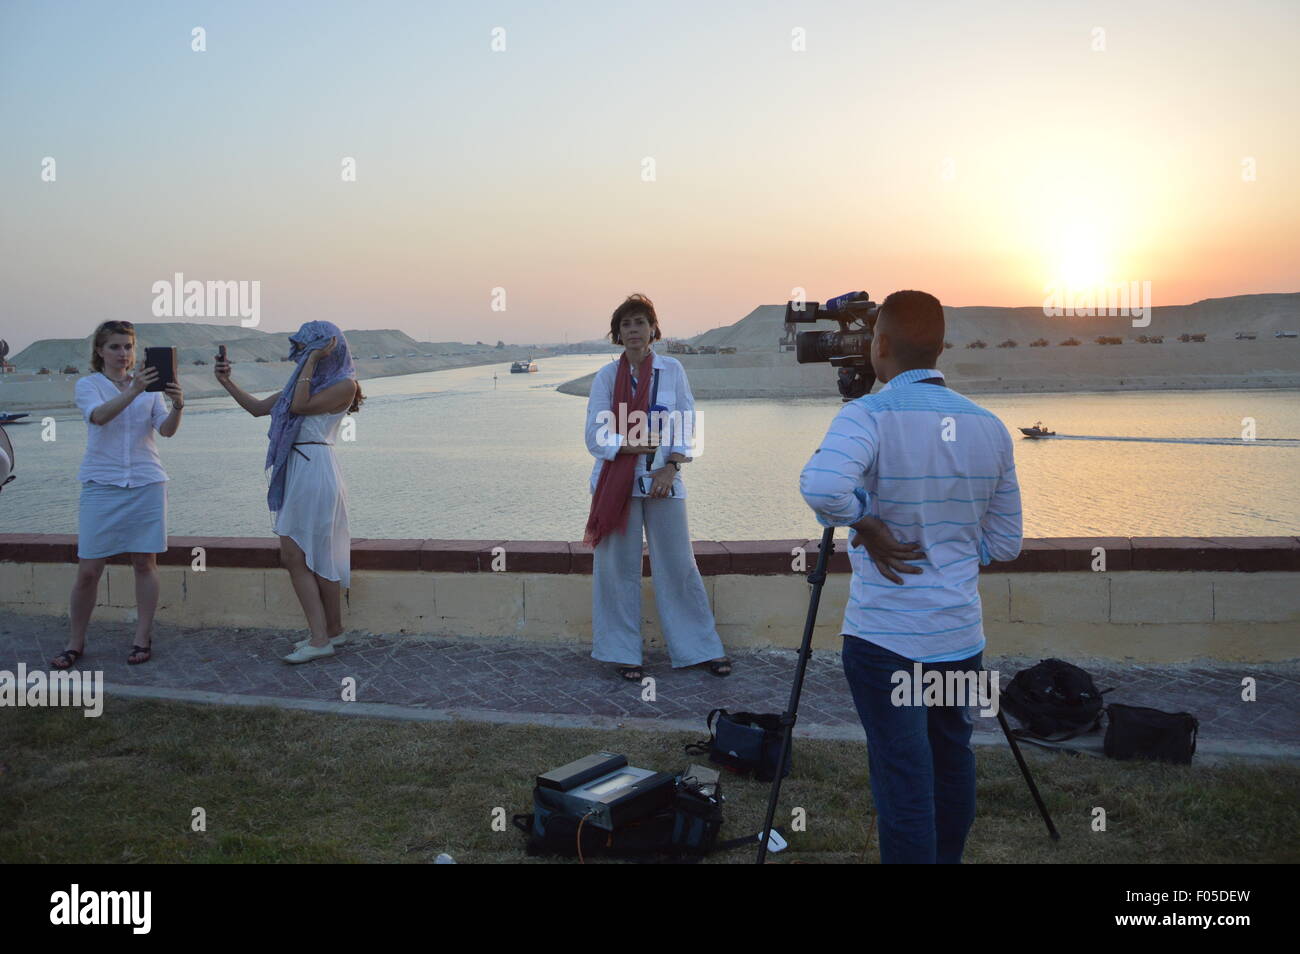 Cairo, Egypt. 6th Aug, 2015. International media and selfie takers at the inauguration of the new Suez Canal upgrade, completed after 1 year of non-stop 24/7 work, aiming to increase shipping capacity from from 49 to 97 ships per day, and decreasing waiting times from 24 to 11 hours. Credit:  Barry Iverson/Alamy Live News Stock Photo